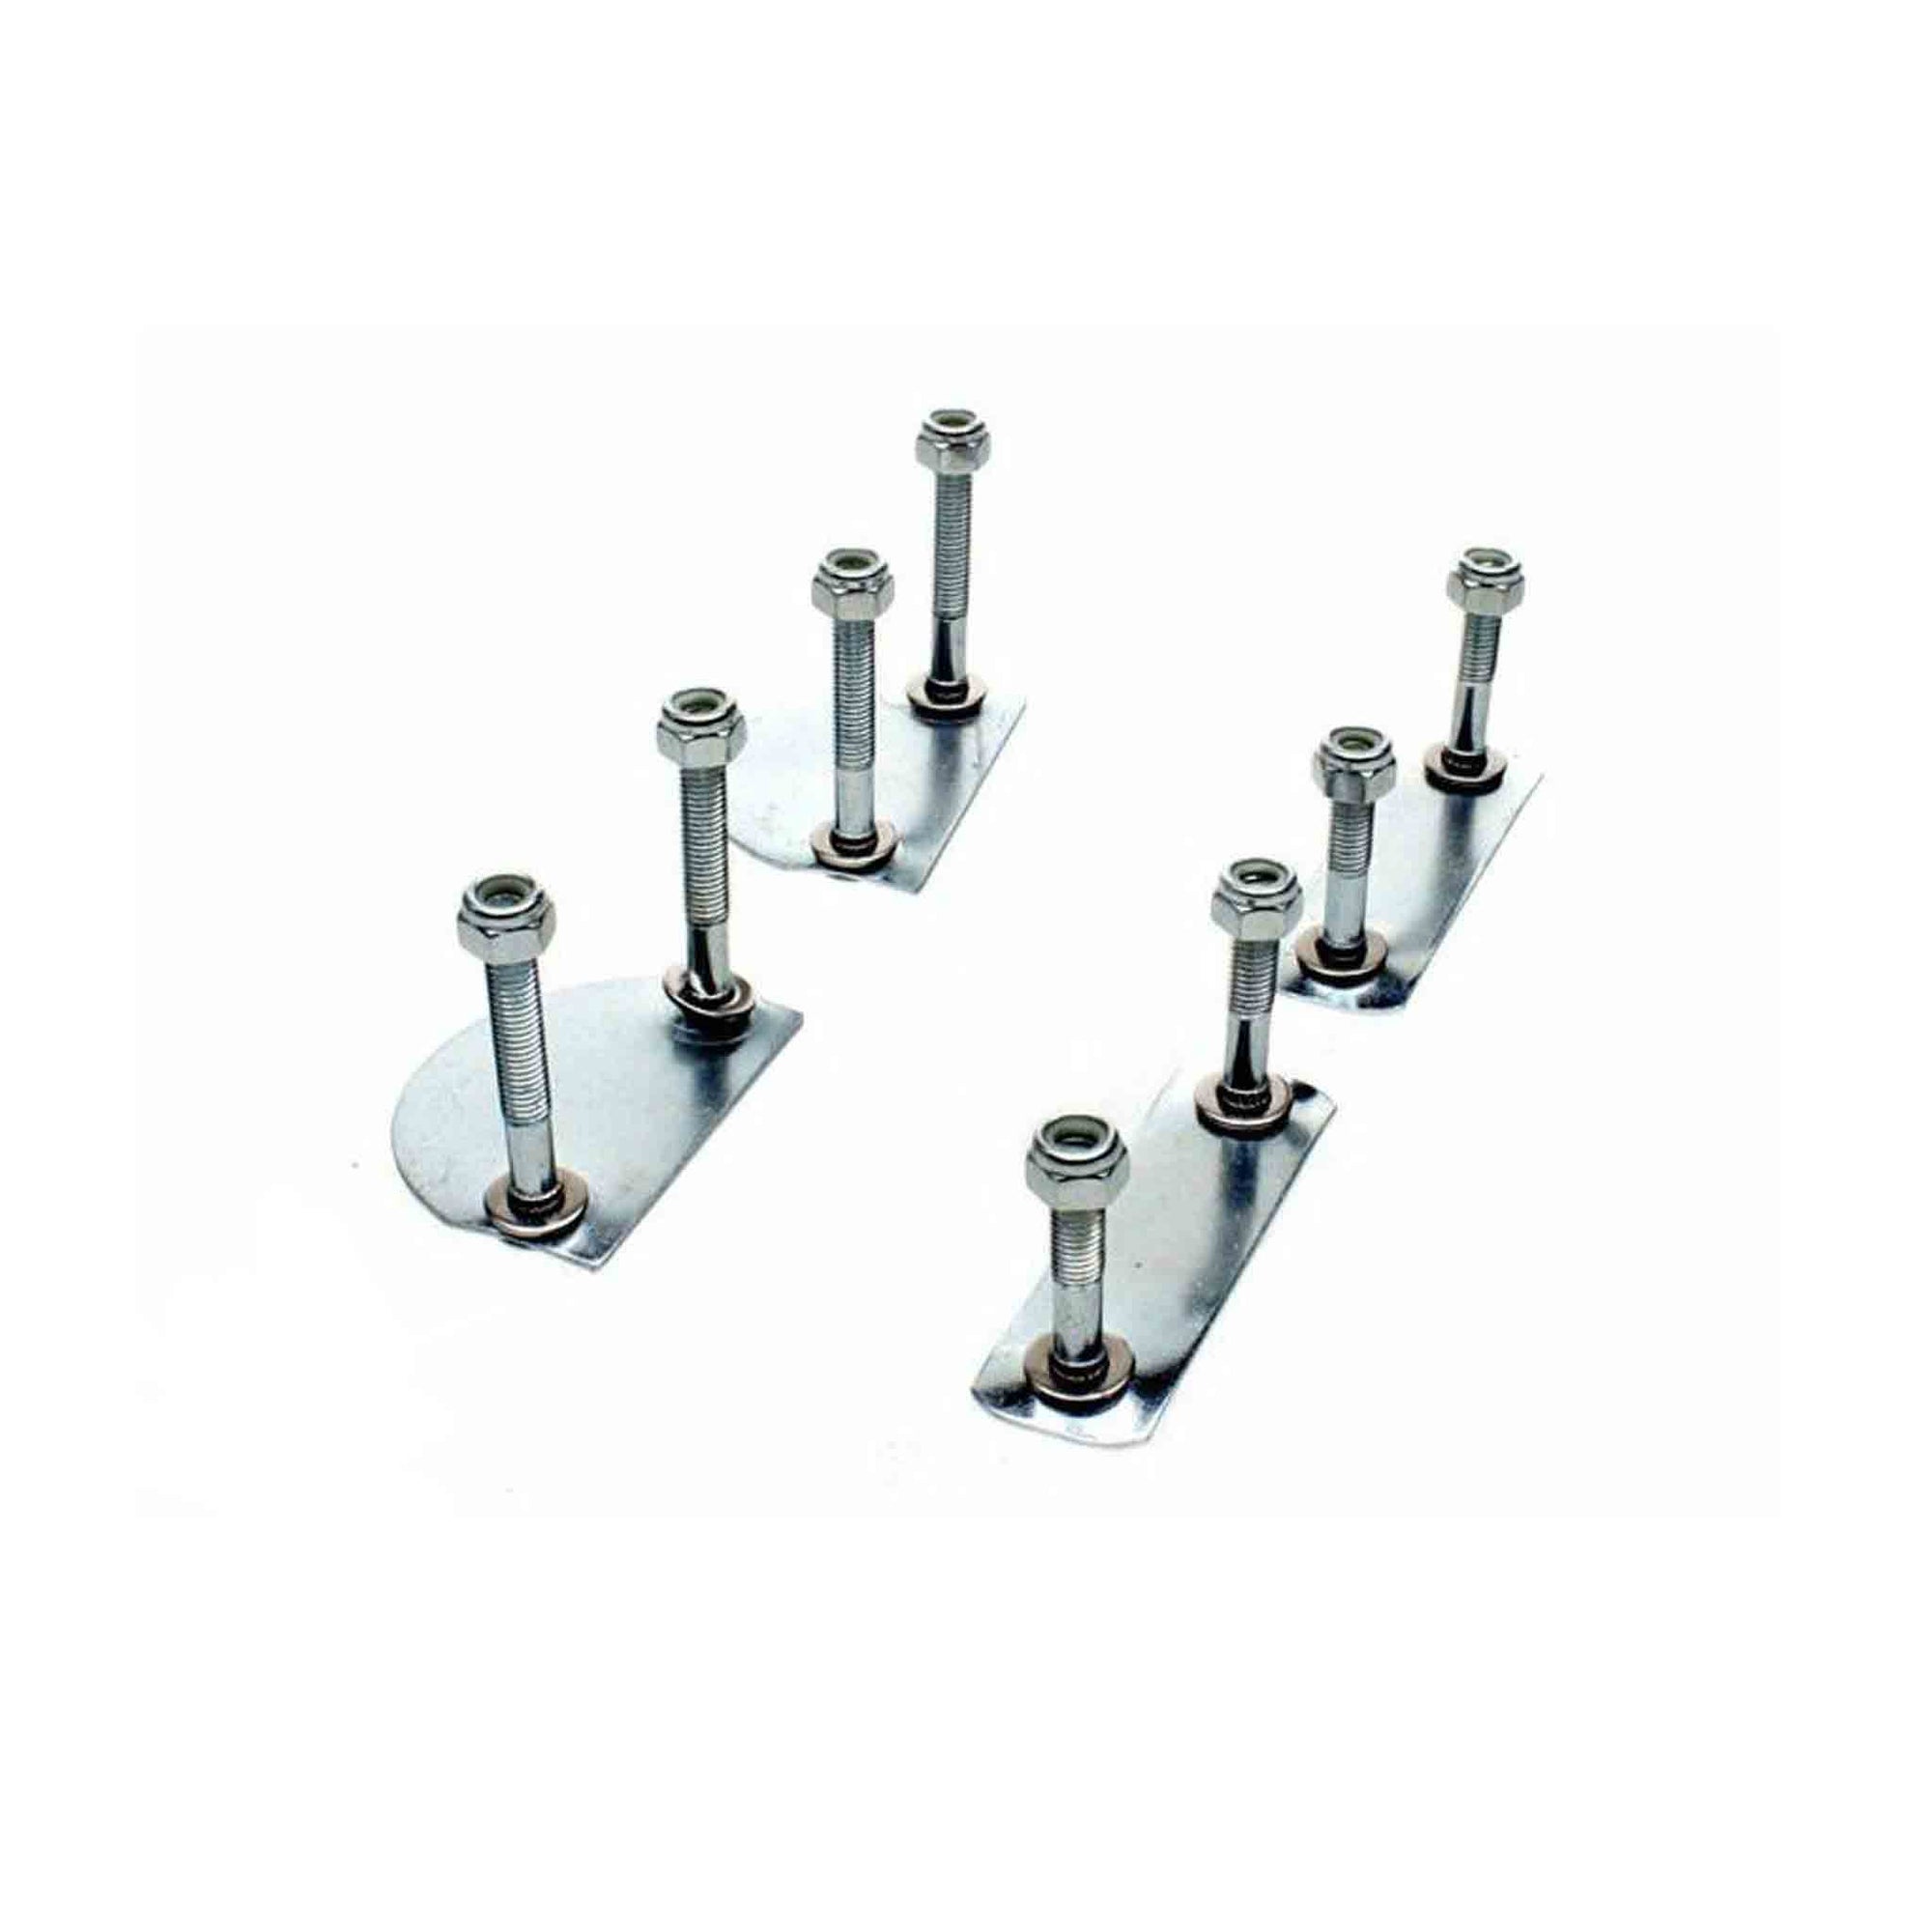 Roller Skates Plates Mounting Fixing Kits- 2 Front & 2 Rear - Roller Skates Parts and Accessories | JT Skate